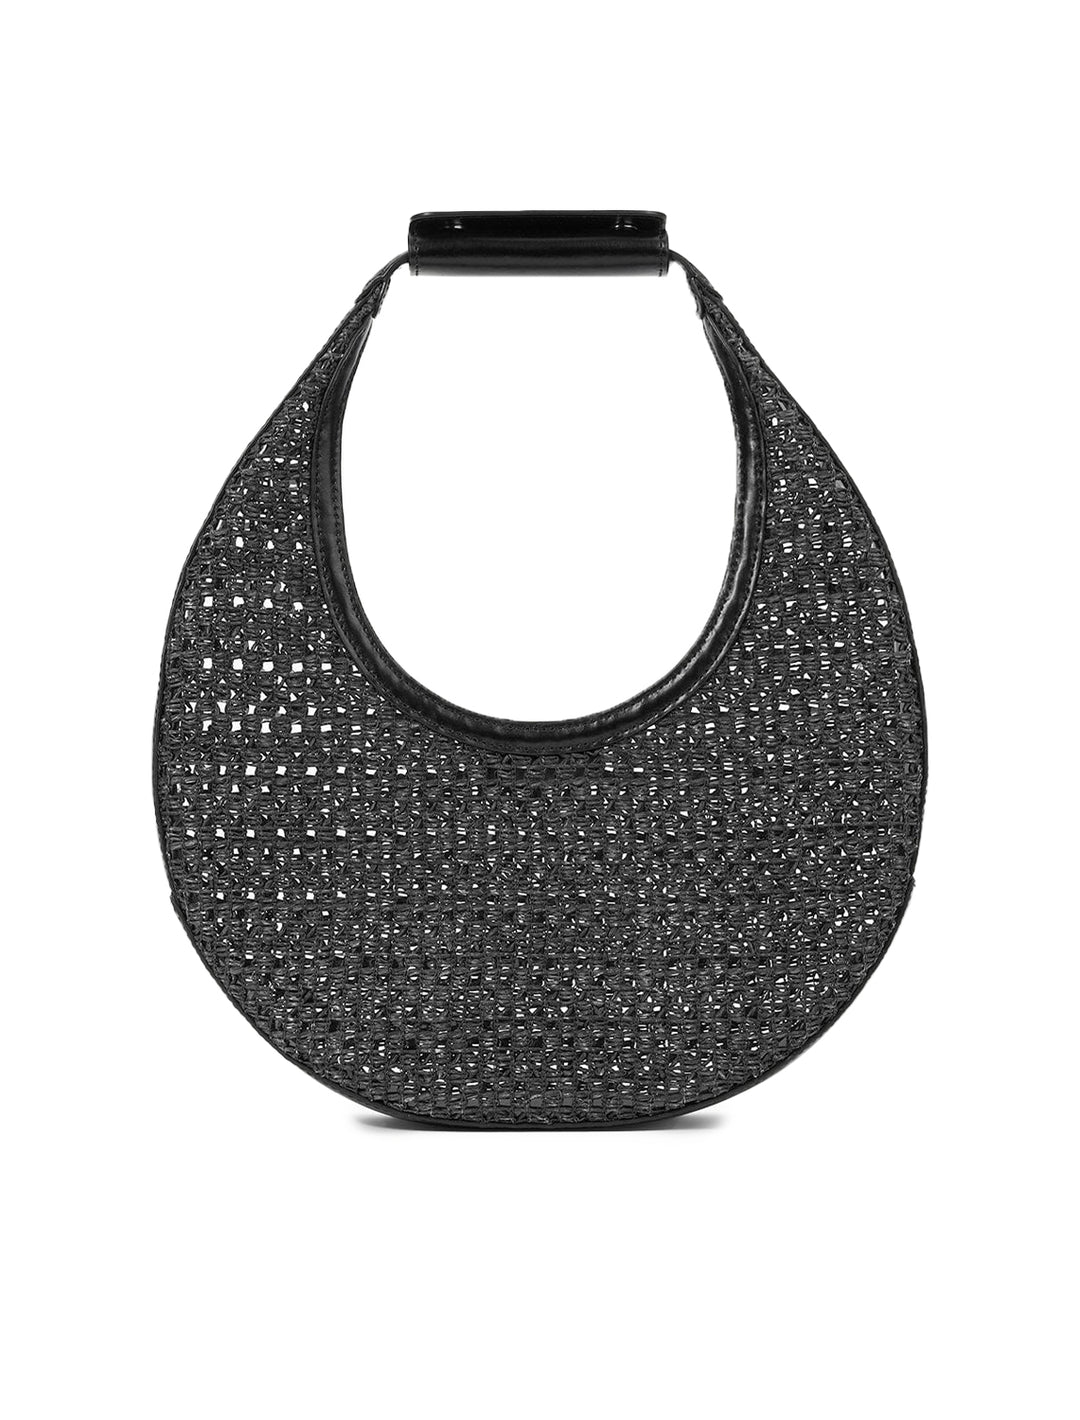 Front view of STAUD's moon woven raffia tote bag in black.